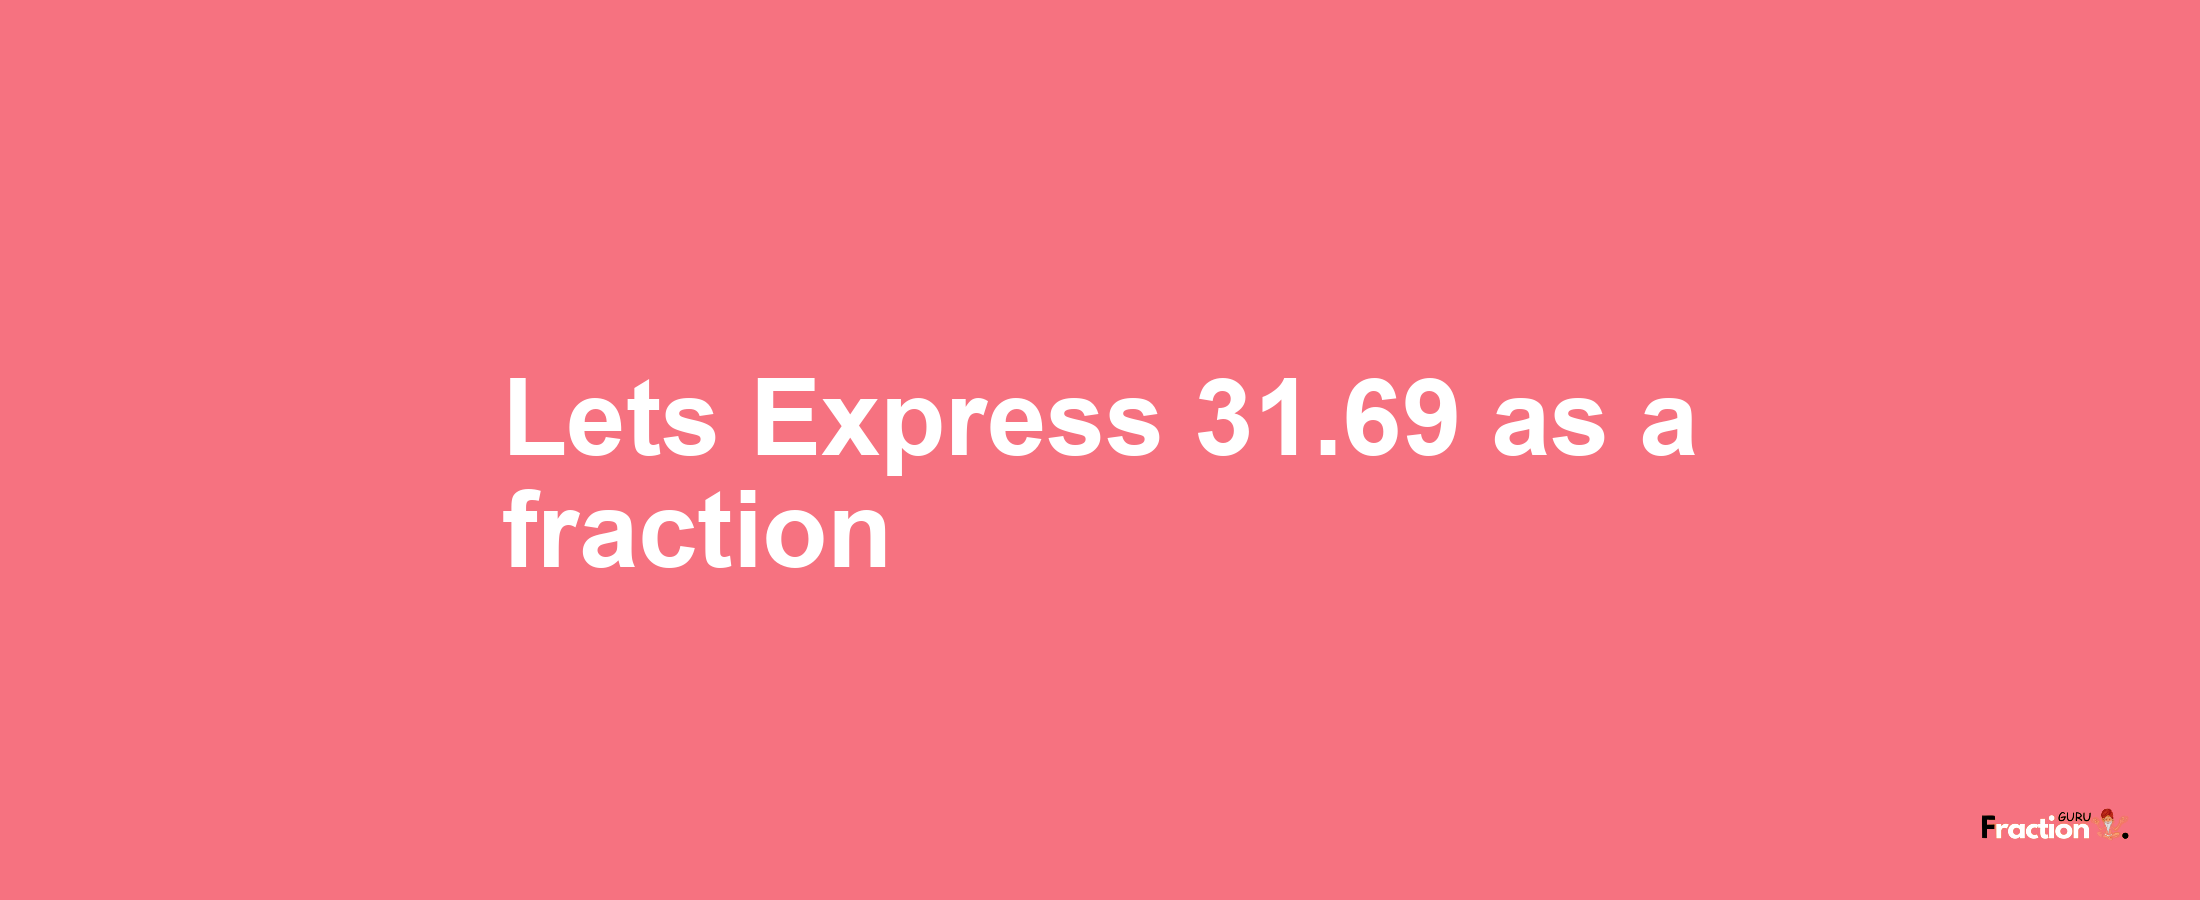 Lets Express 31.69 as afraction